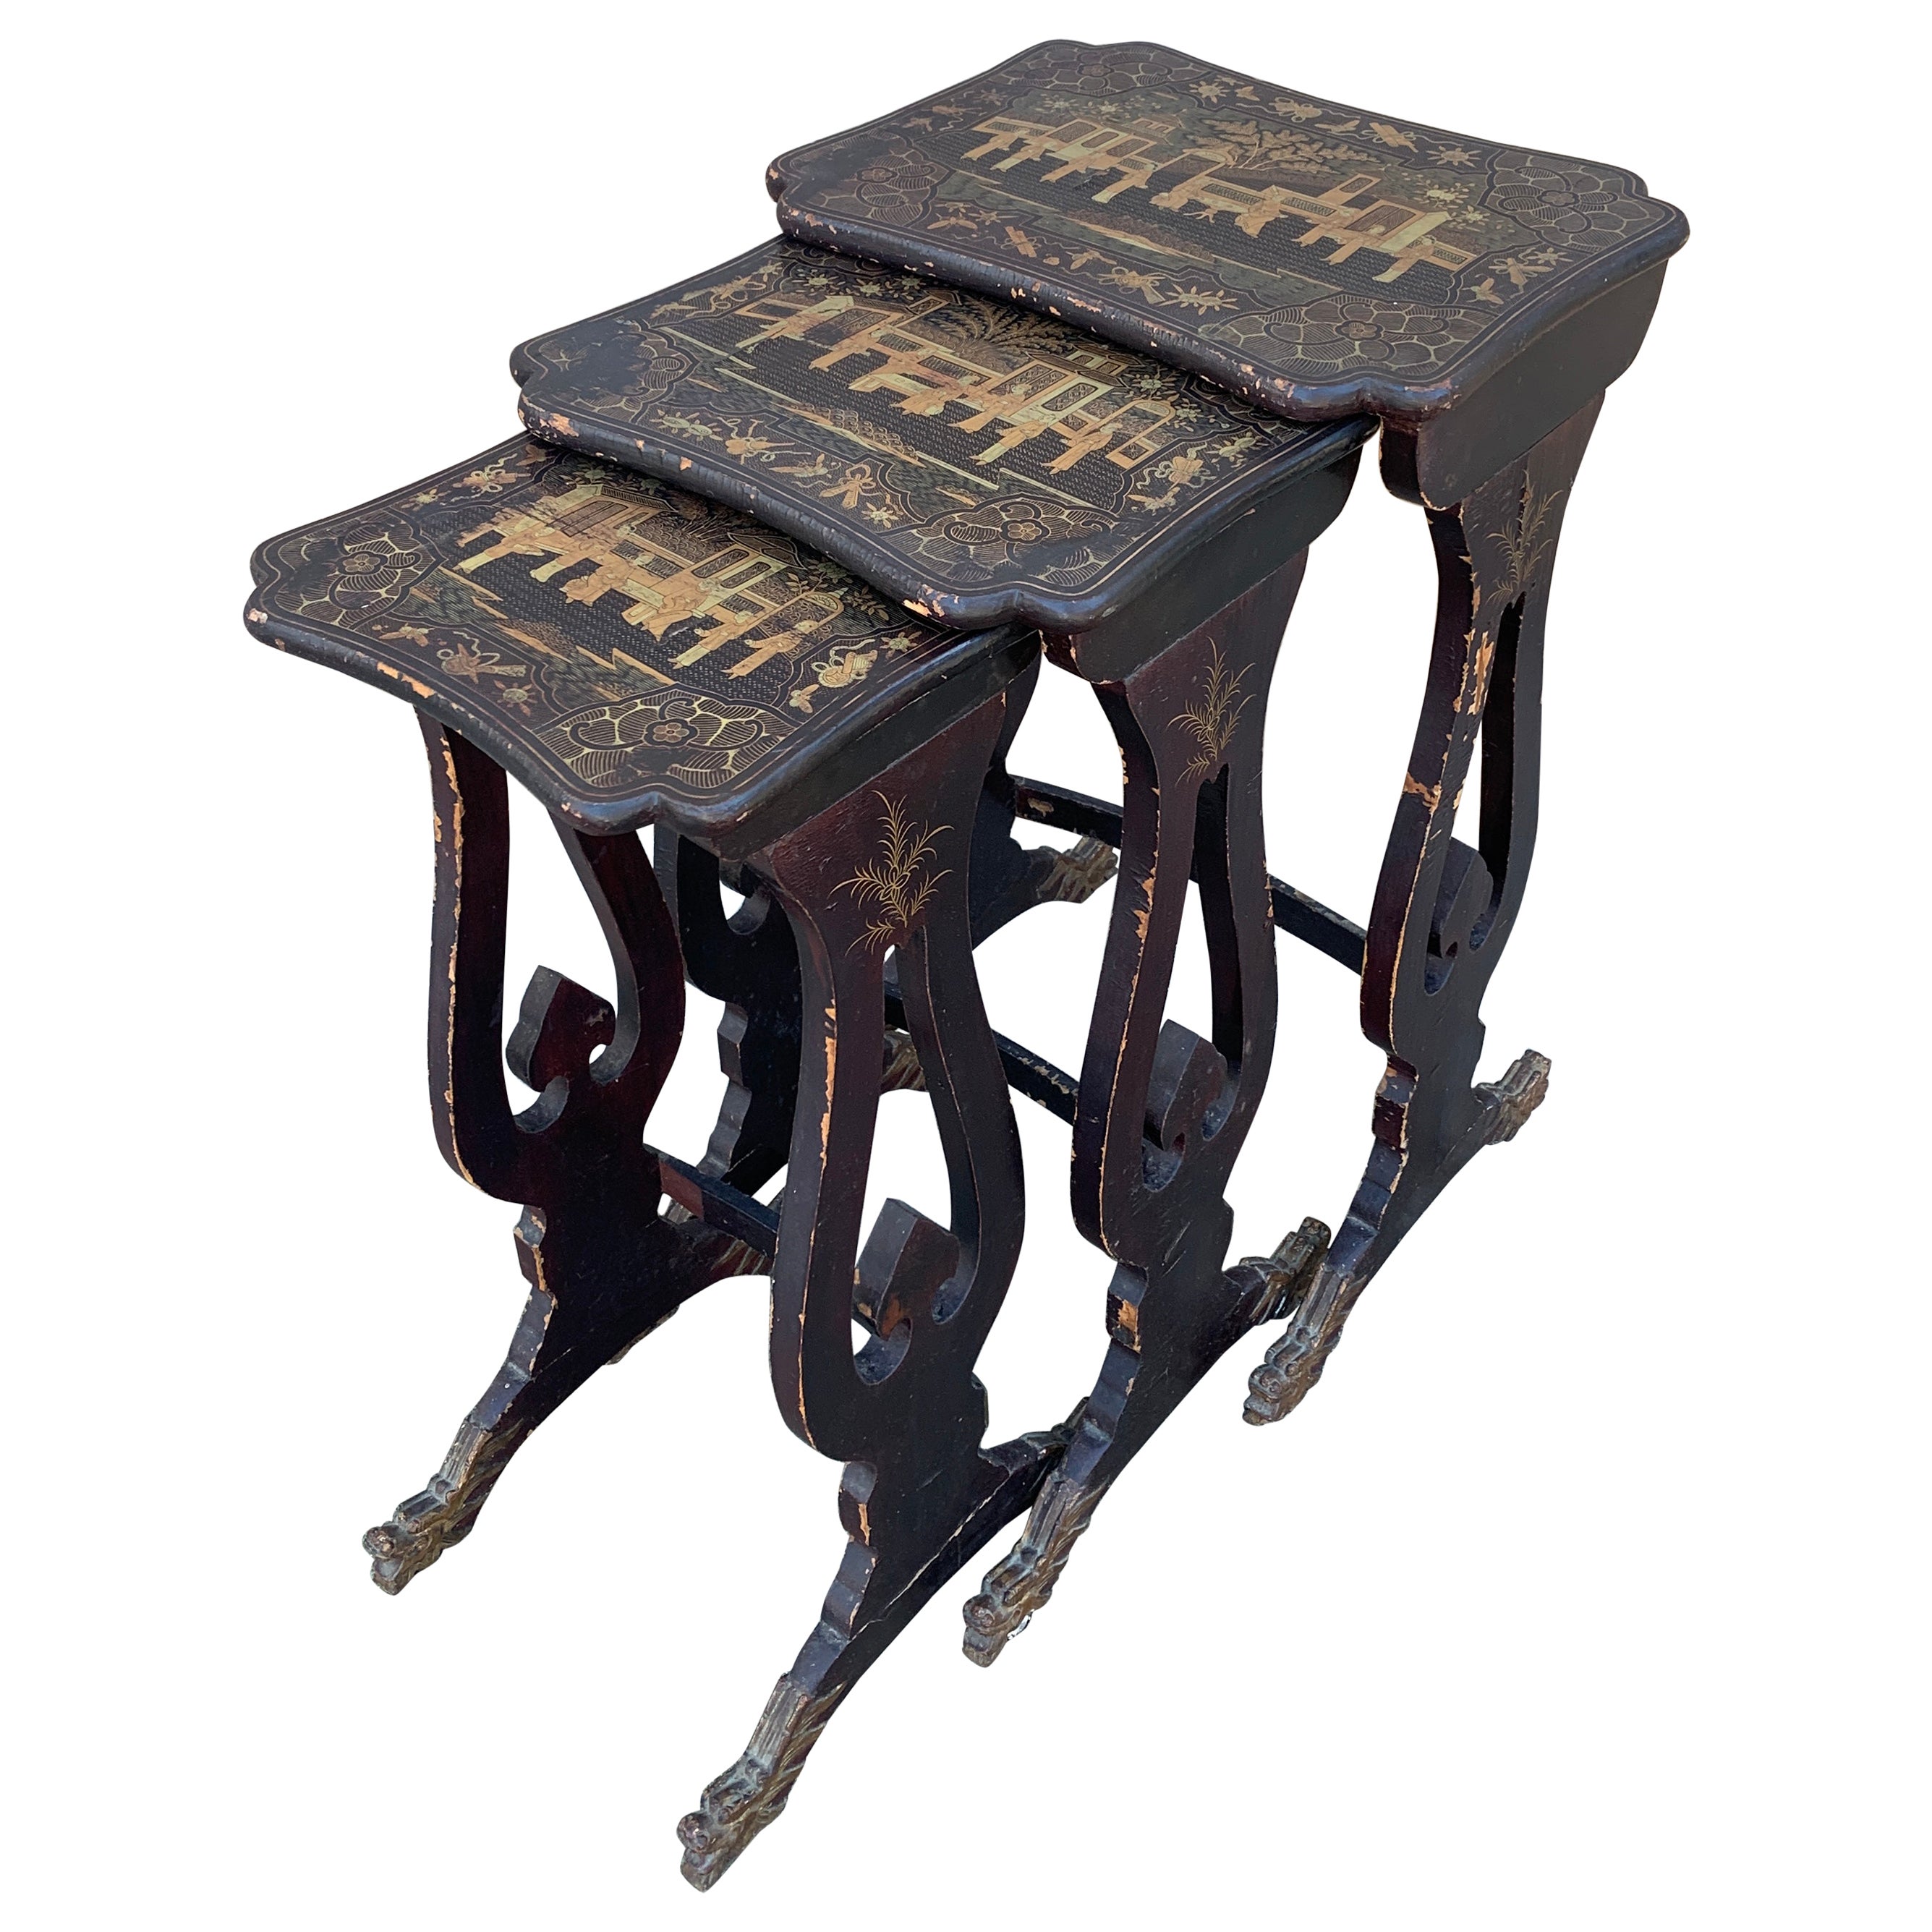 Antique Regency Chinoiserie Black Lacquered Nesting Tables with Carved Dragons For Sale